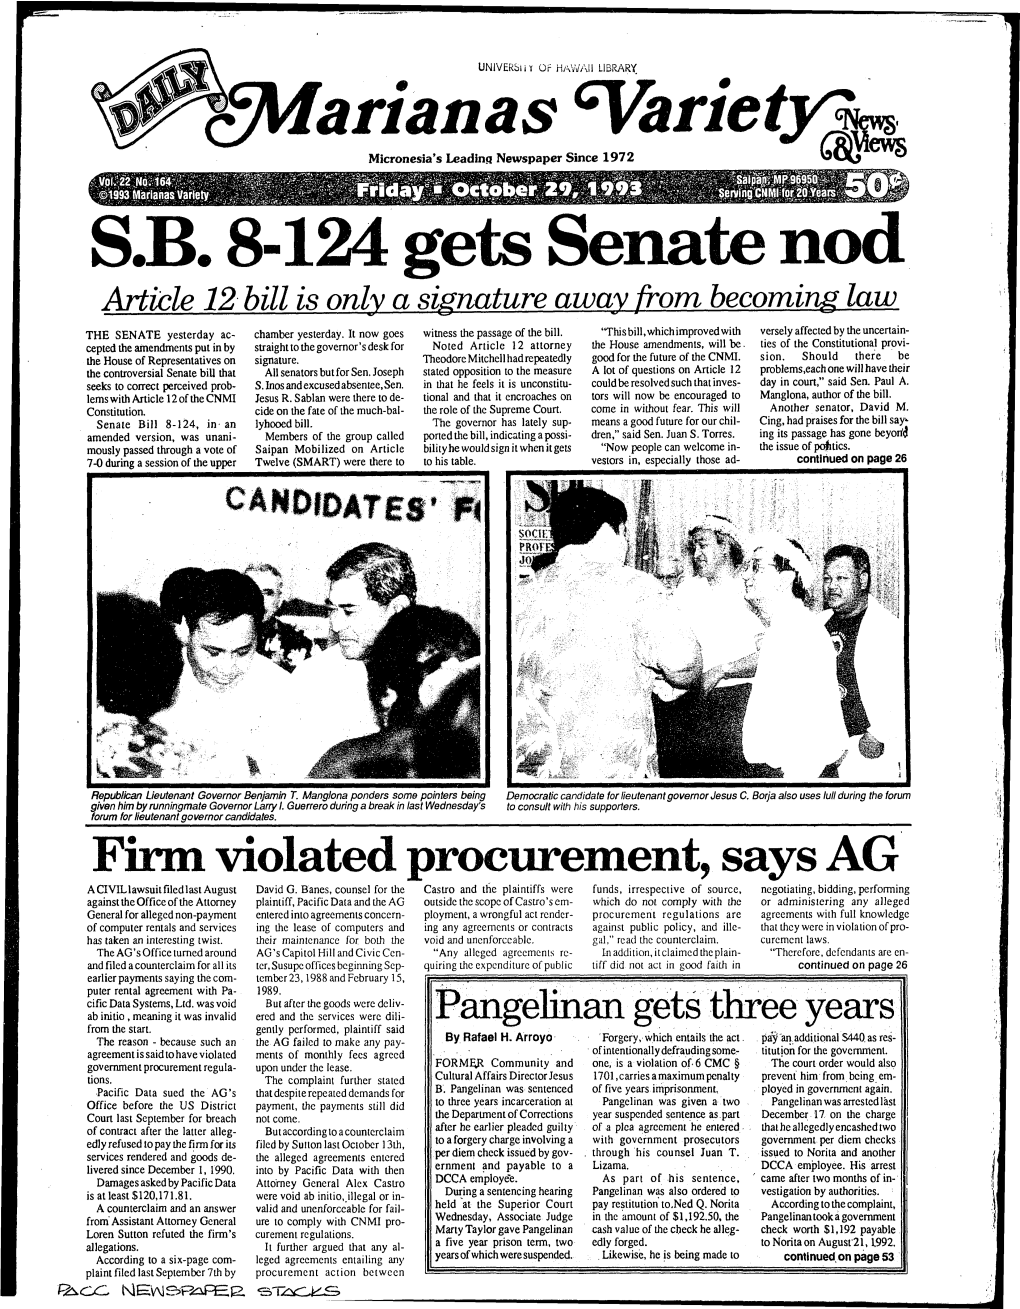 S.B. 8-124 Gets Senate Nod Article 12 Bill Is Only a Signature Away from Becoming Law